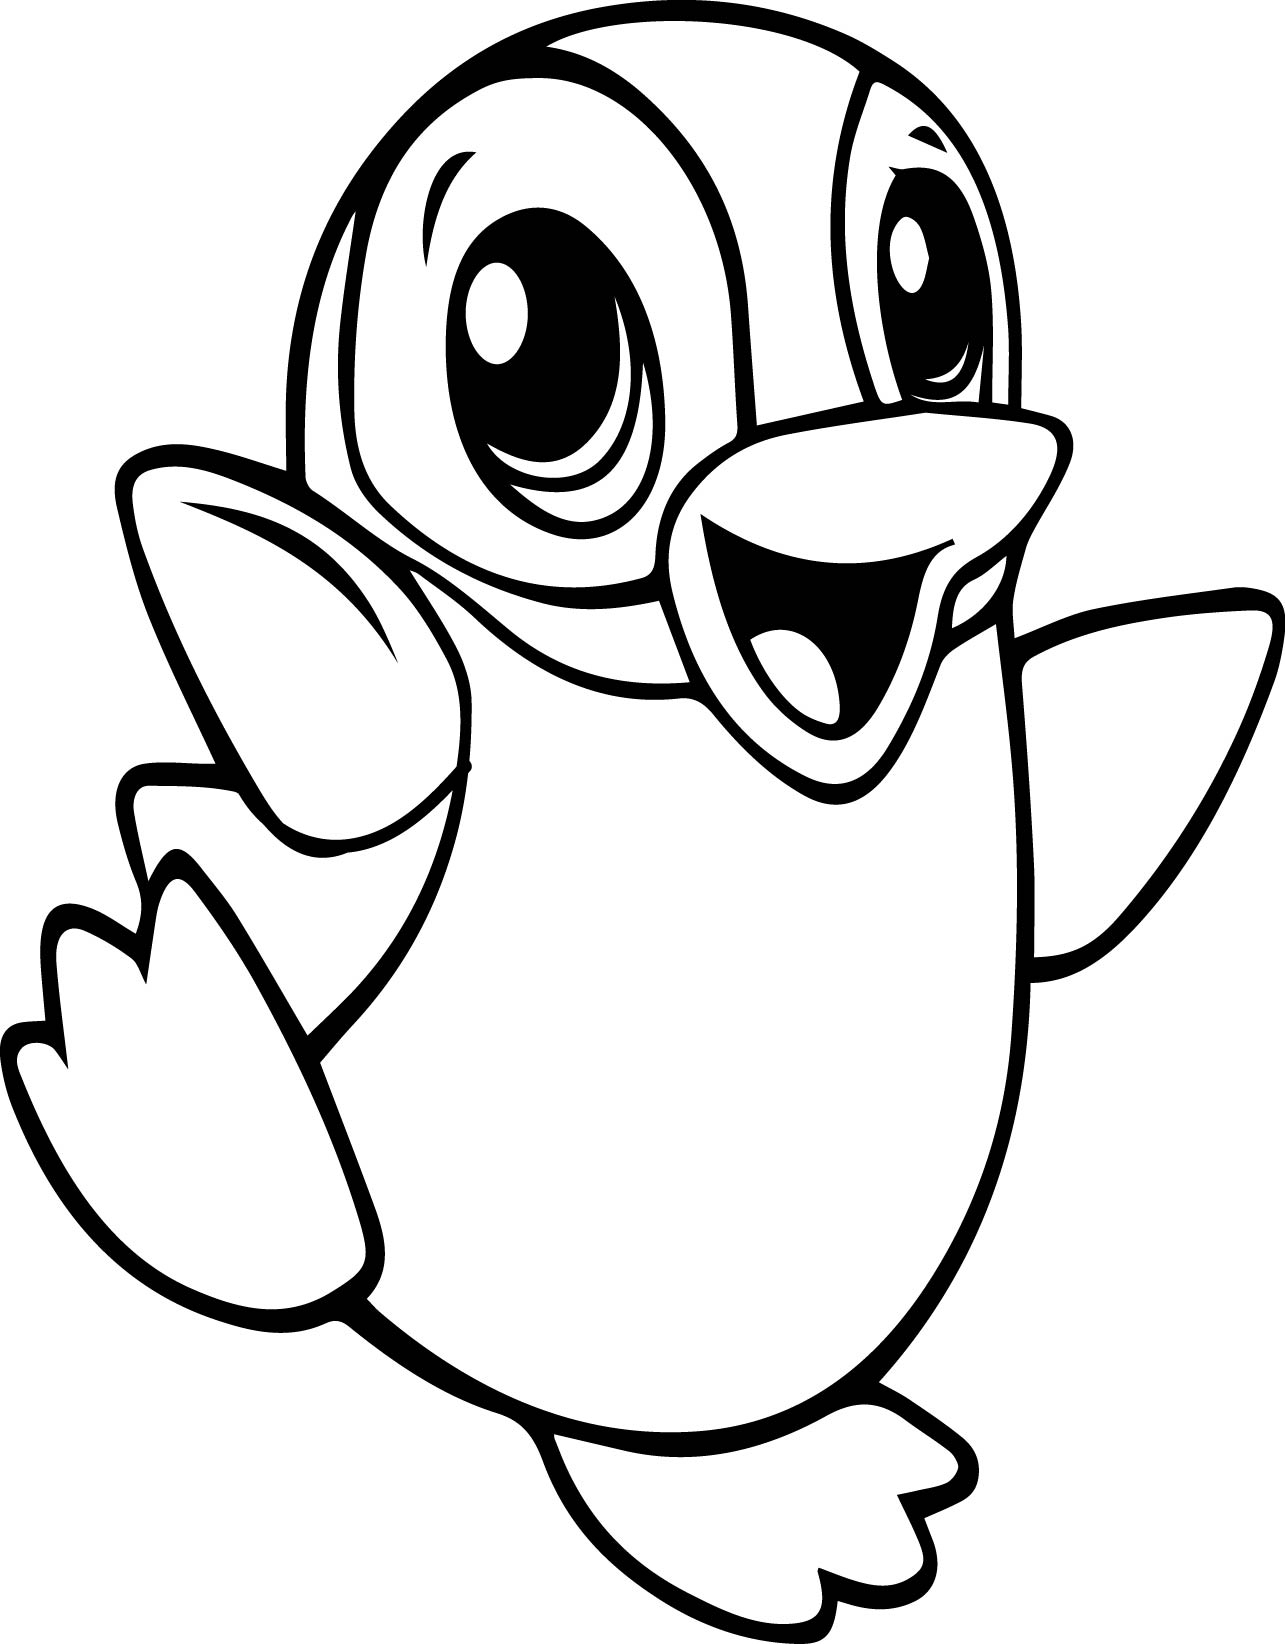 Cute Animal Coloring Pages at GetColorings.com | Free ...